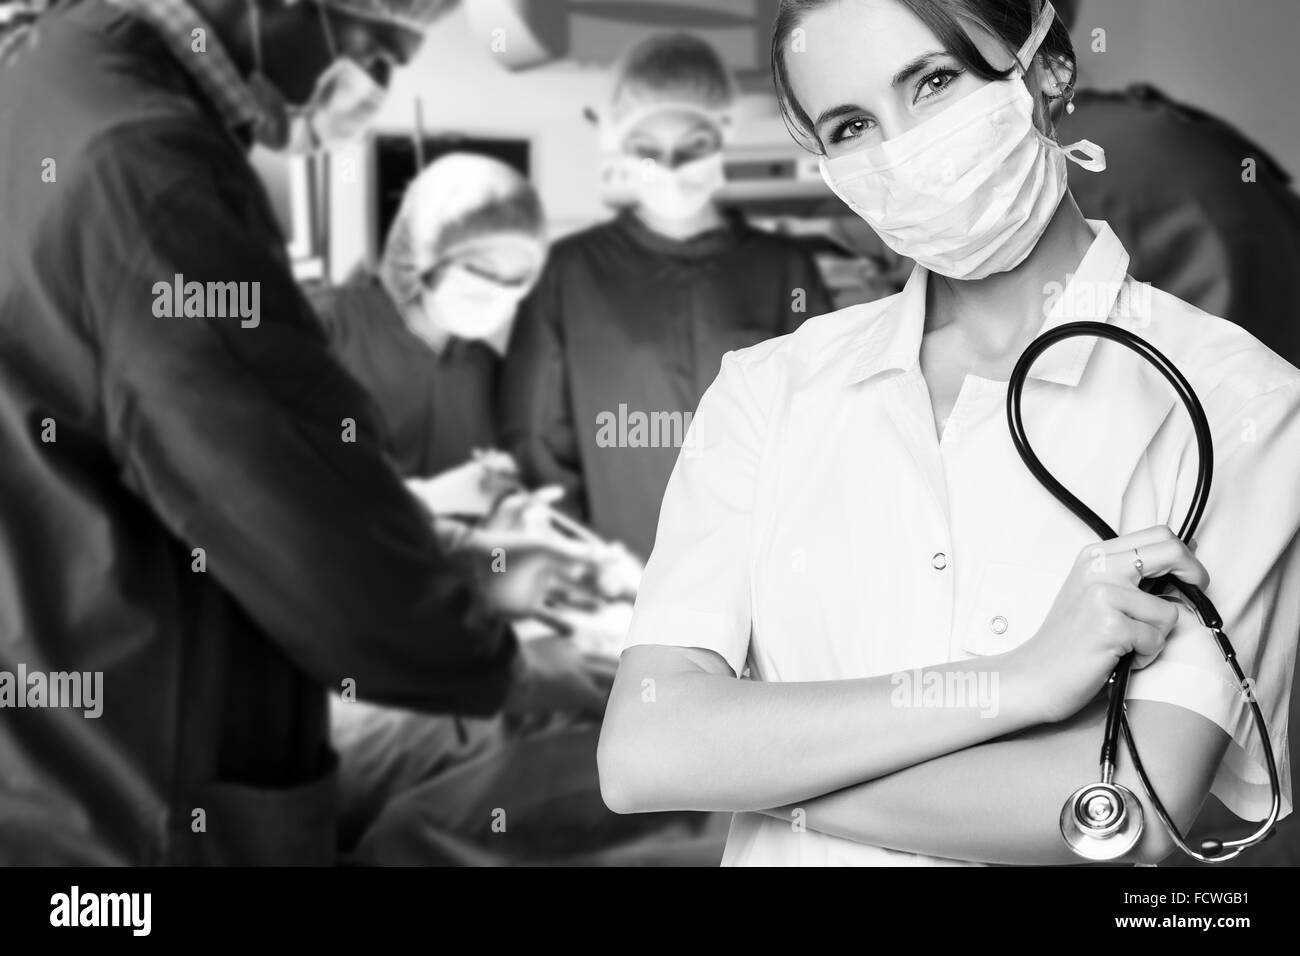 Surgery team operating in a surgical room Stock Photo